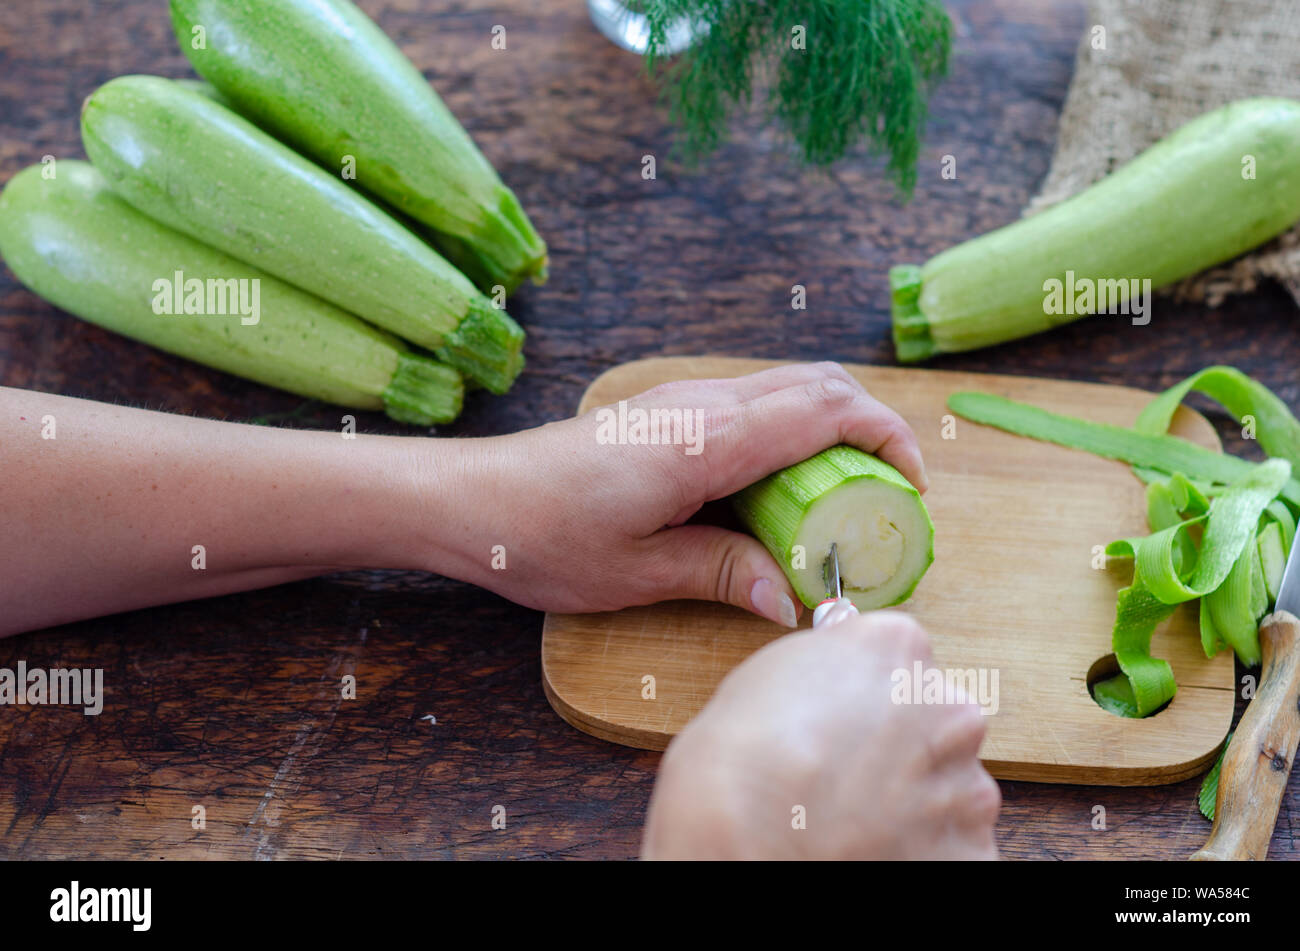 Woman is carving the zucchini in the kitchen. Stock Photo